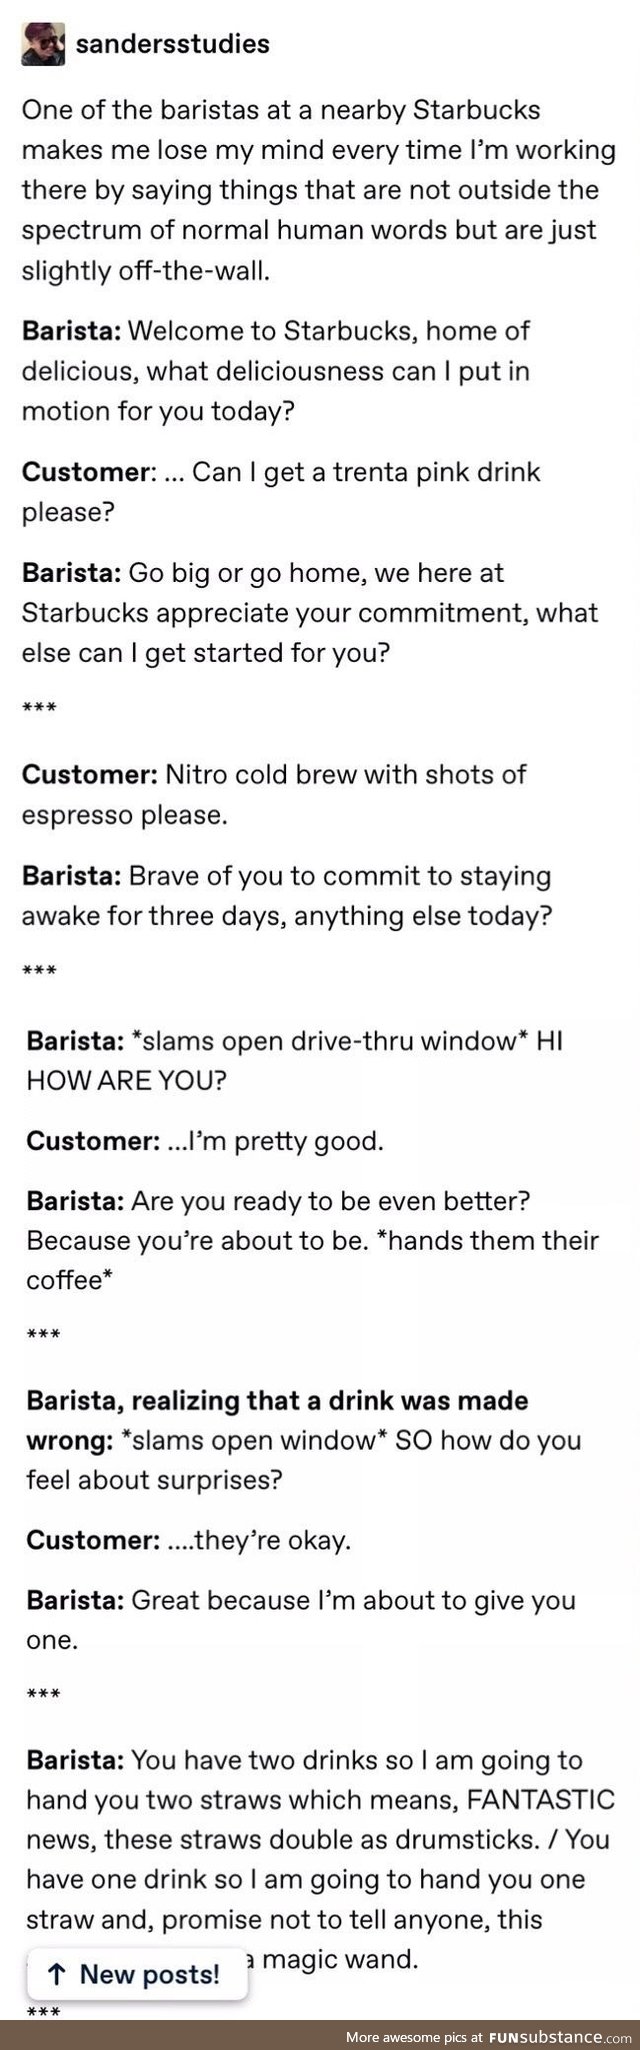 If more baristas were like this, I might have to start drinking coffee